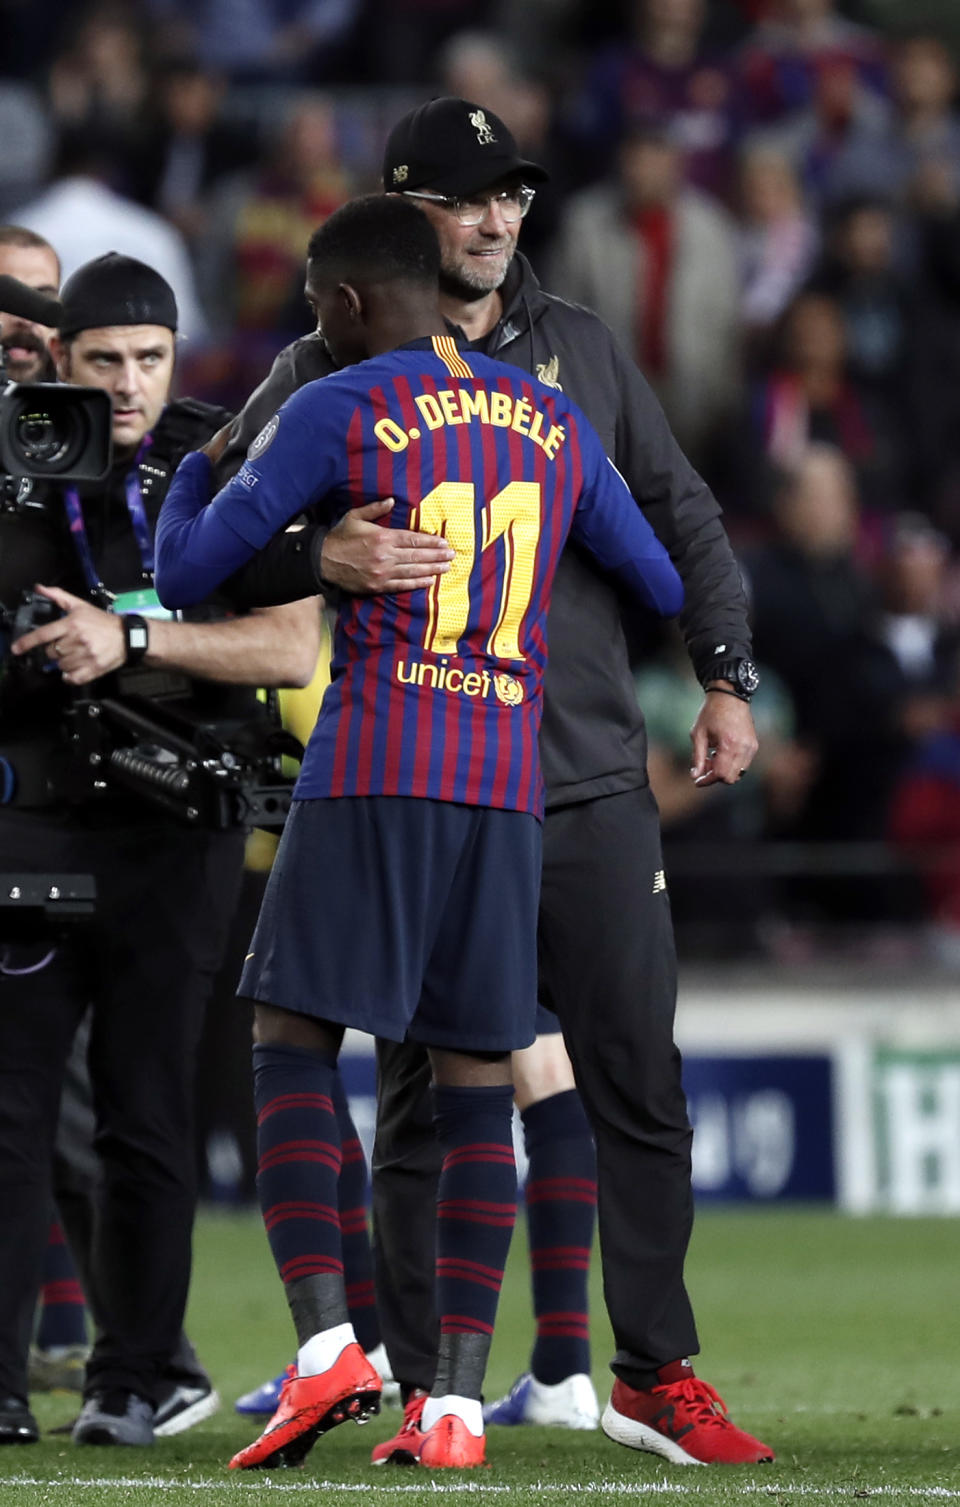 Liverpool coach Juergen Klopp and Barcelona's Ousmane Dembele embrace each other at the end of the Champions League semifinal, first leg, soccer match between FC Barcelona and Liverpool at the Camp Nou stadium in Barcelona Spain, Wednesday, May 1, 2019. (AP Photo/Joan Monfort)